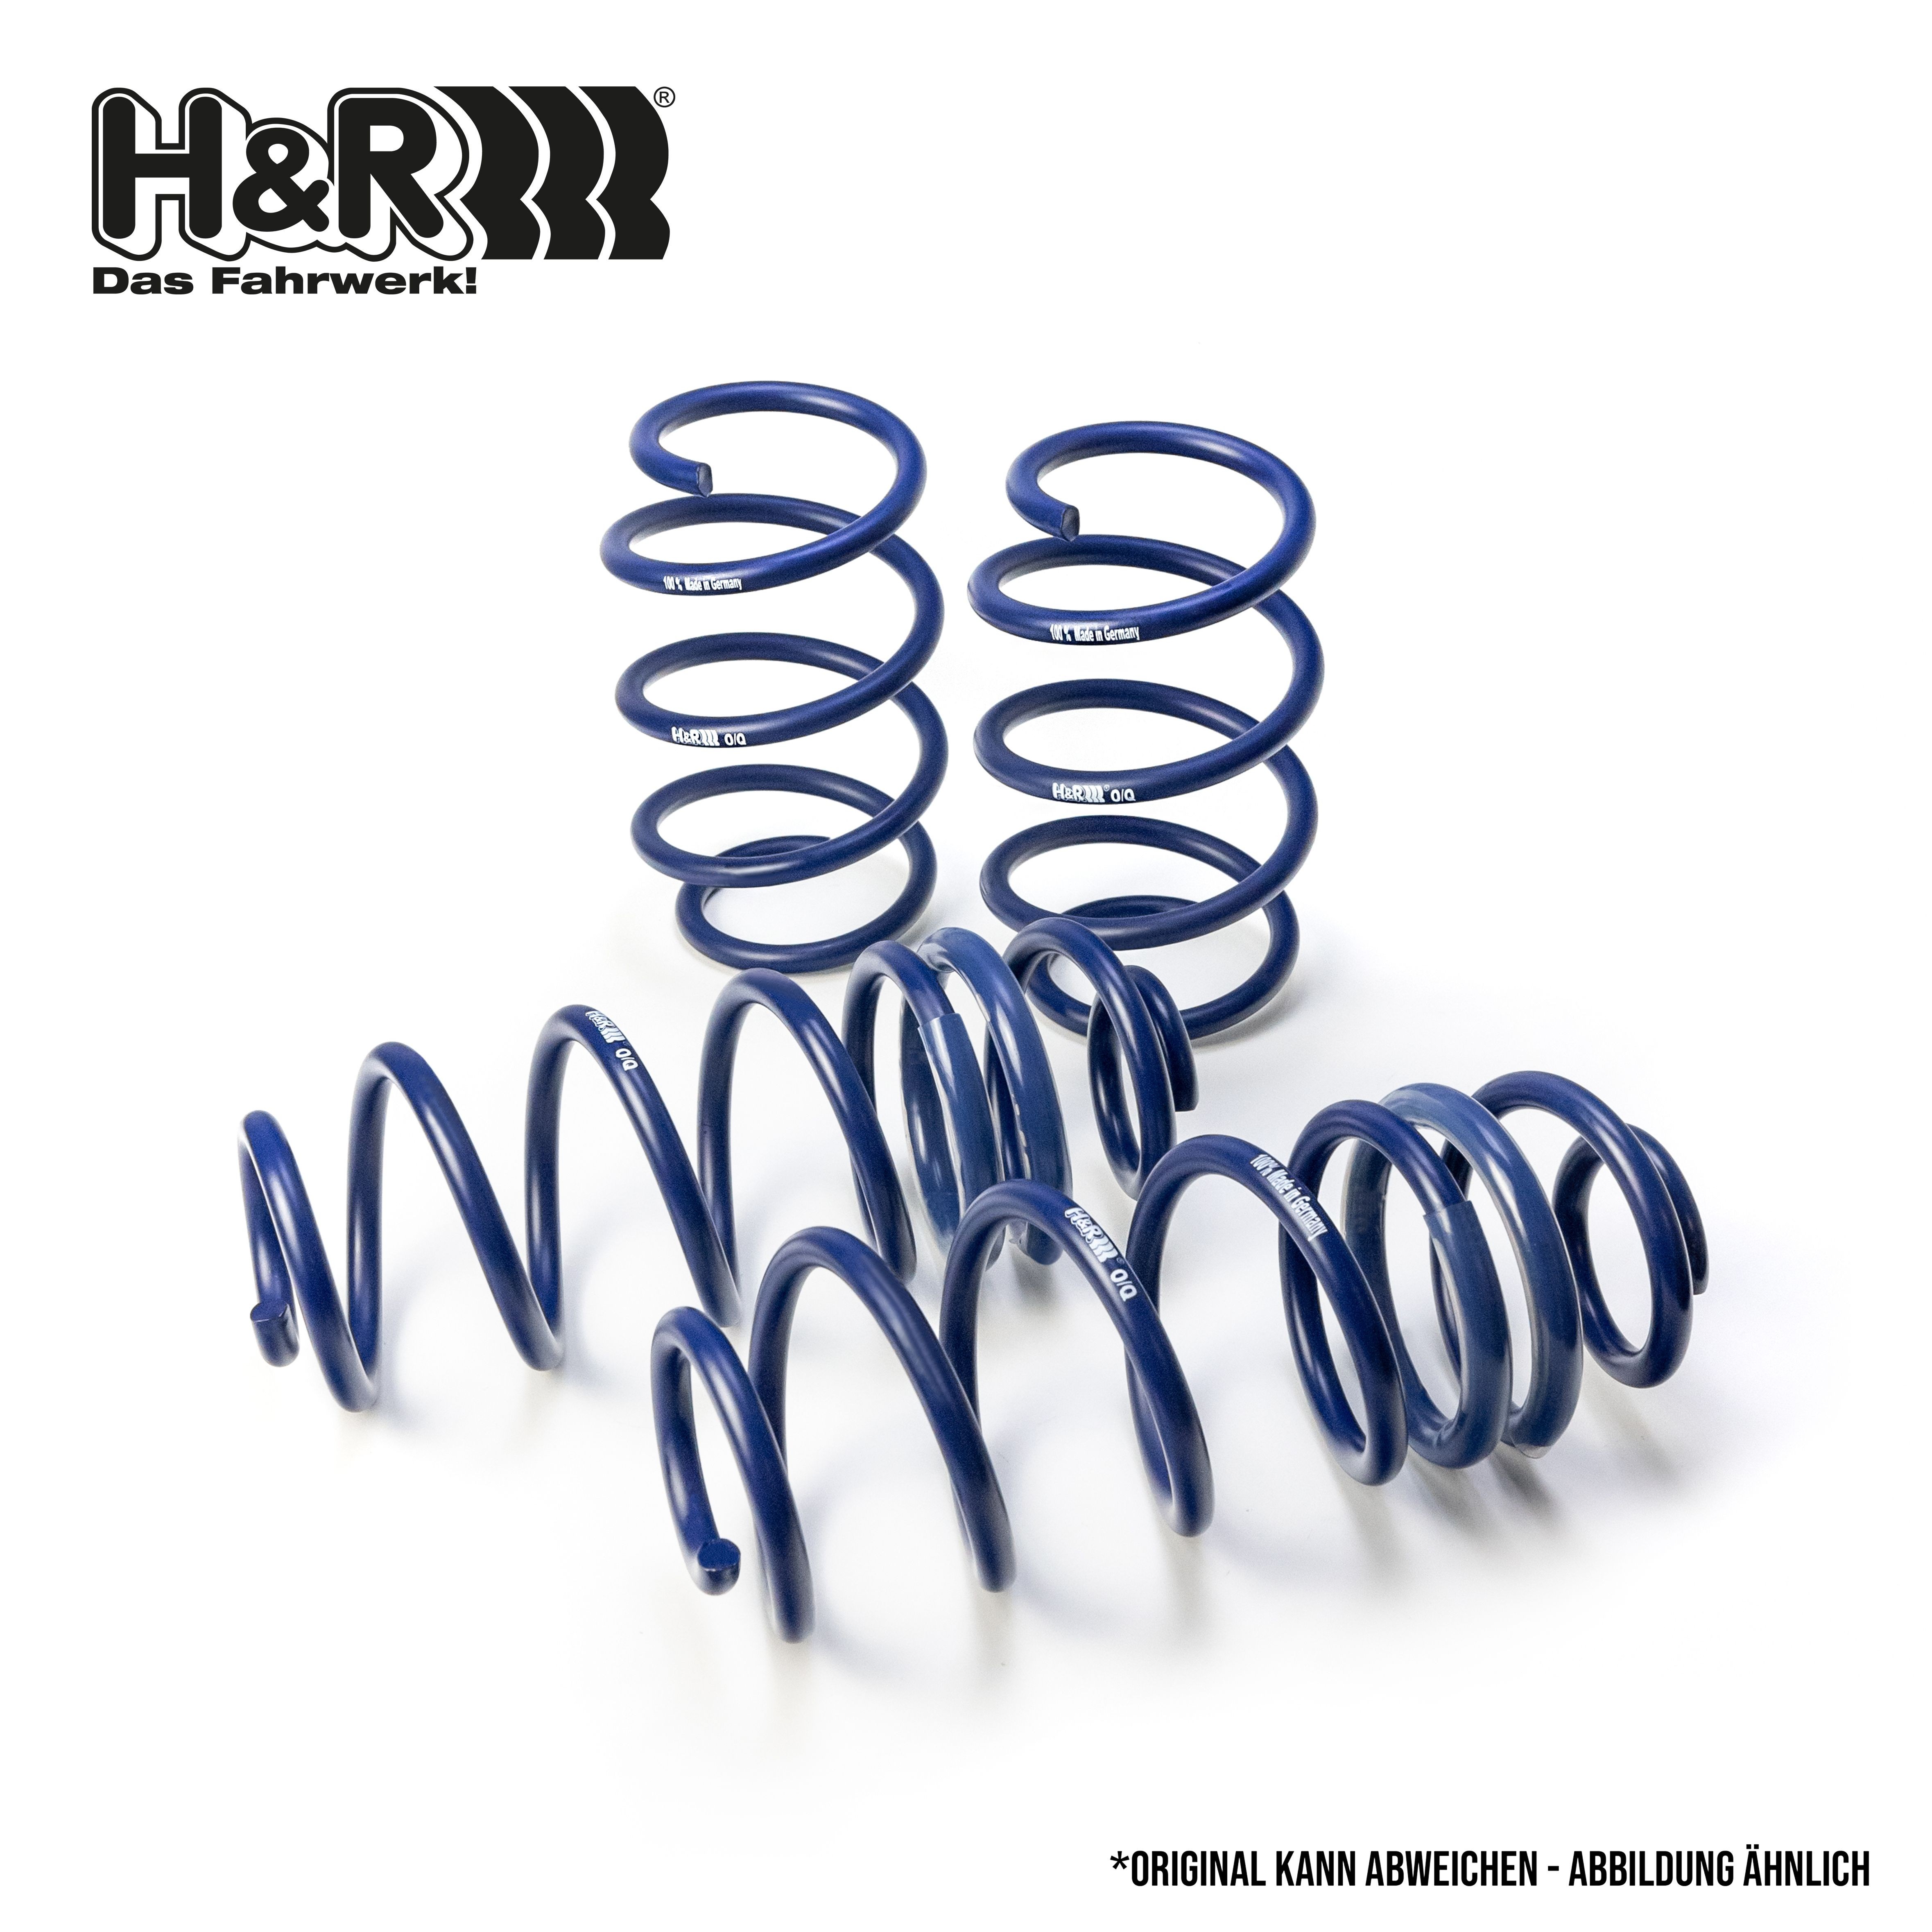 H&R Spring kit 29140-6 for Renault Clio 3